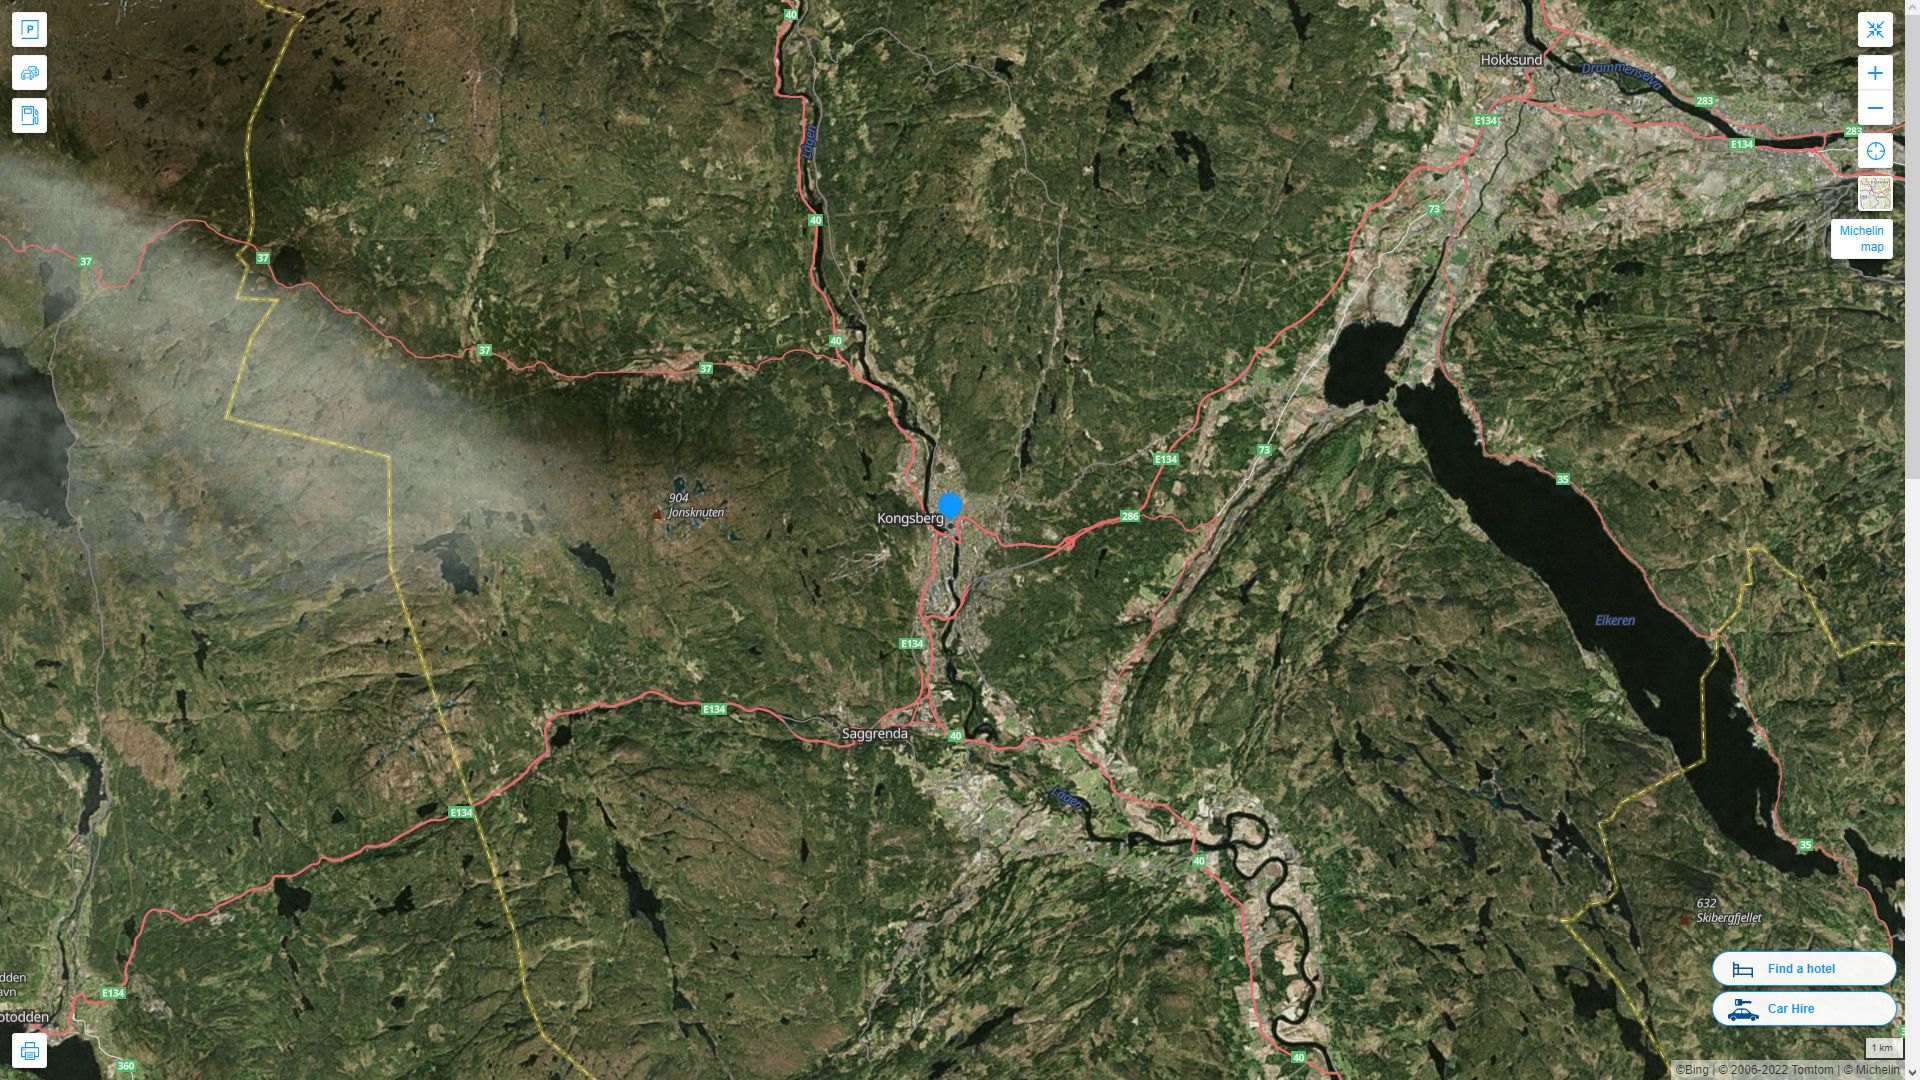 Kongsberg Highway and Road Map with Satellite View